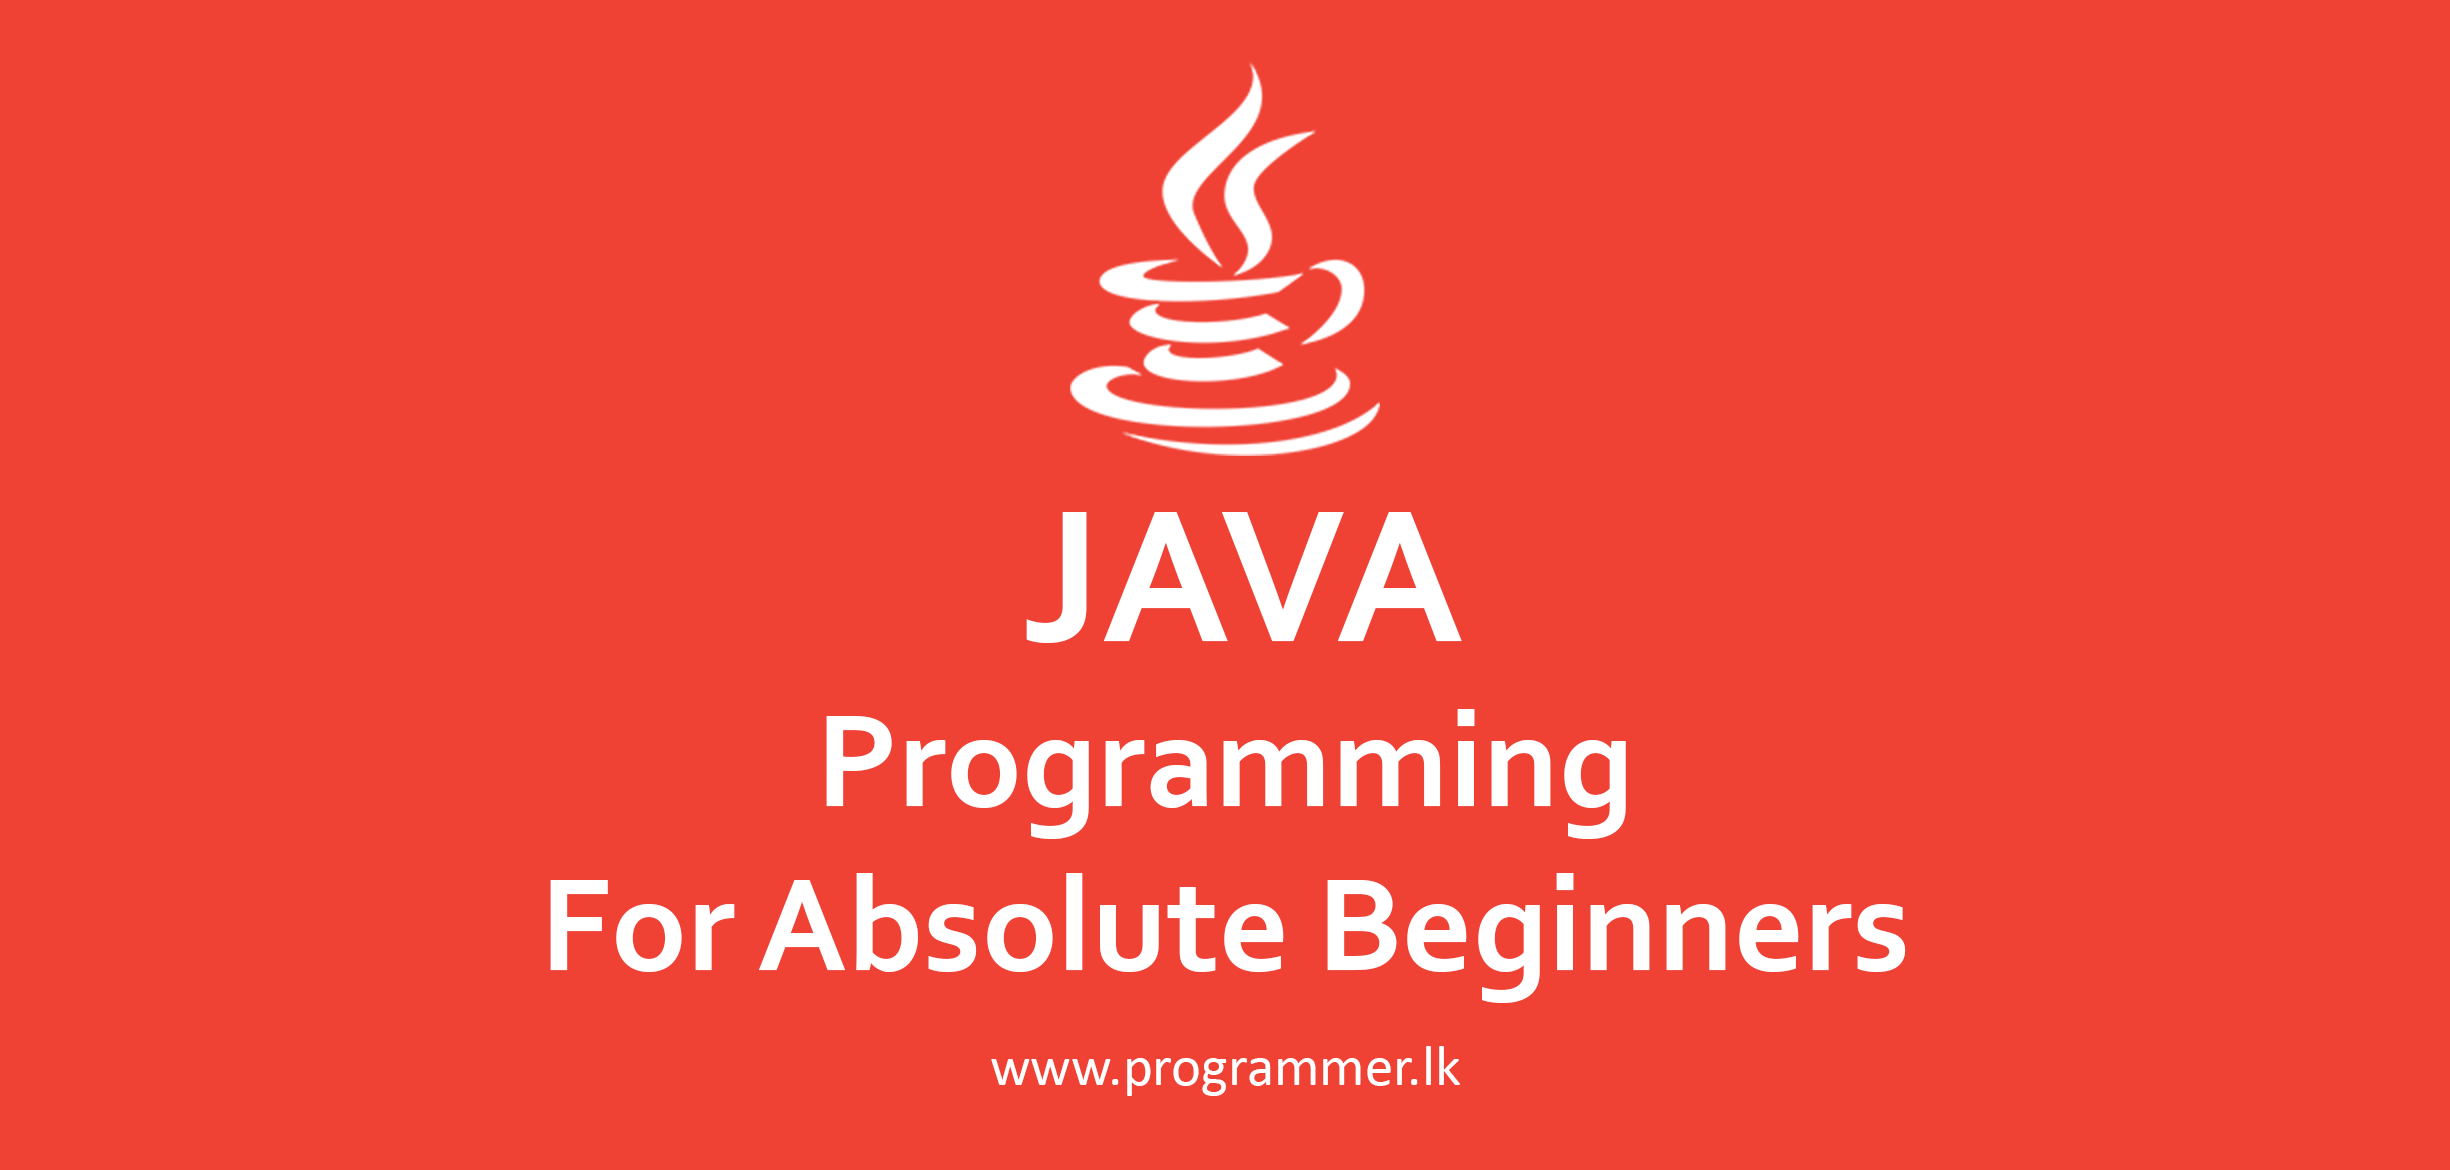 JAVA programming for the absolute beginners course in sri lanka by programmer.lk